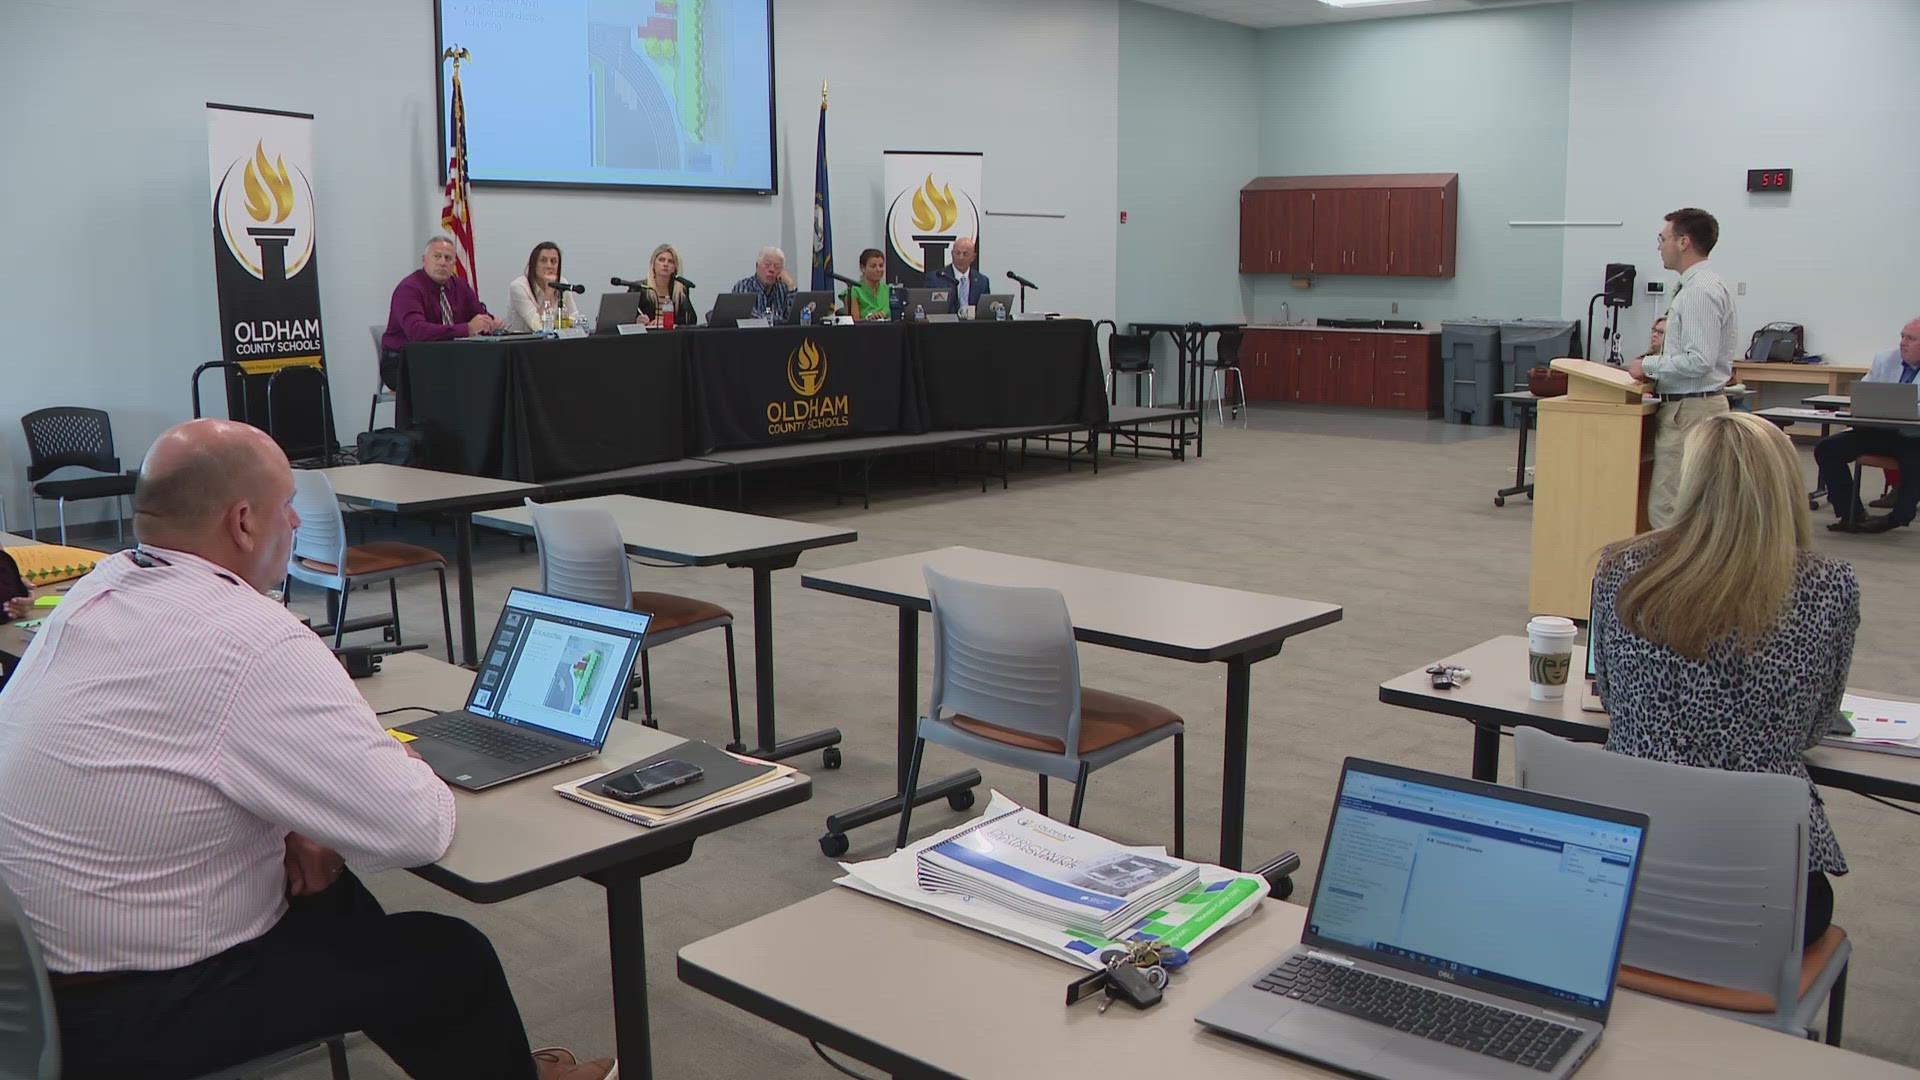 The school board approved a $2 raise to hourly staff and a 7% raise to salaried staff.